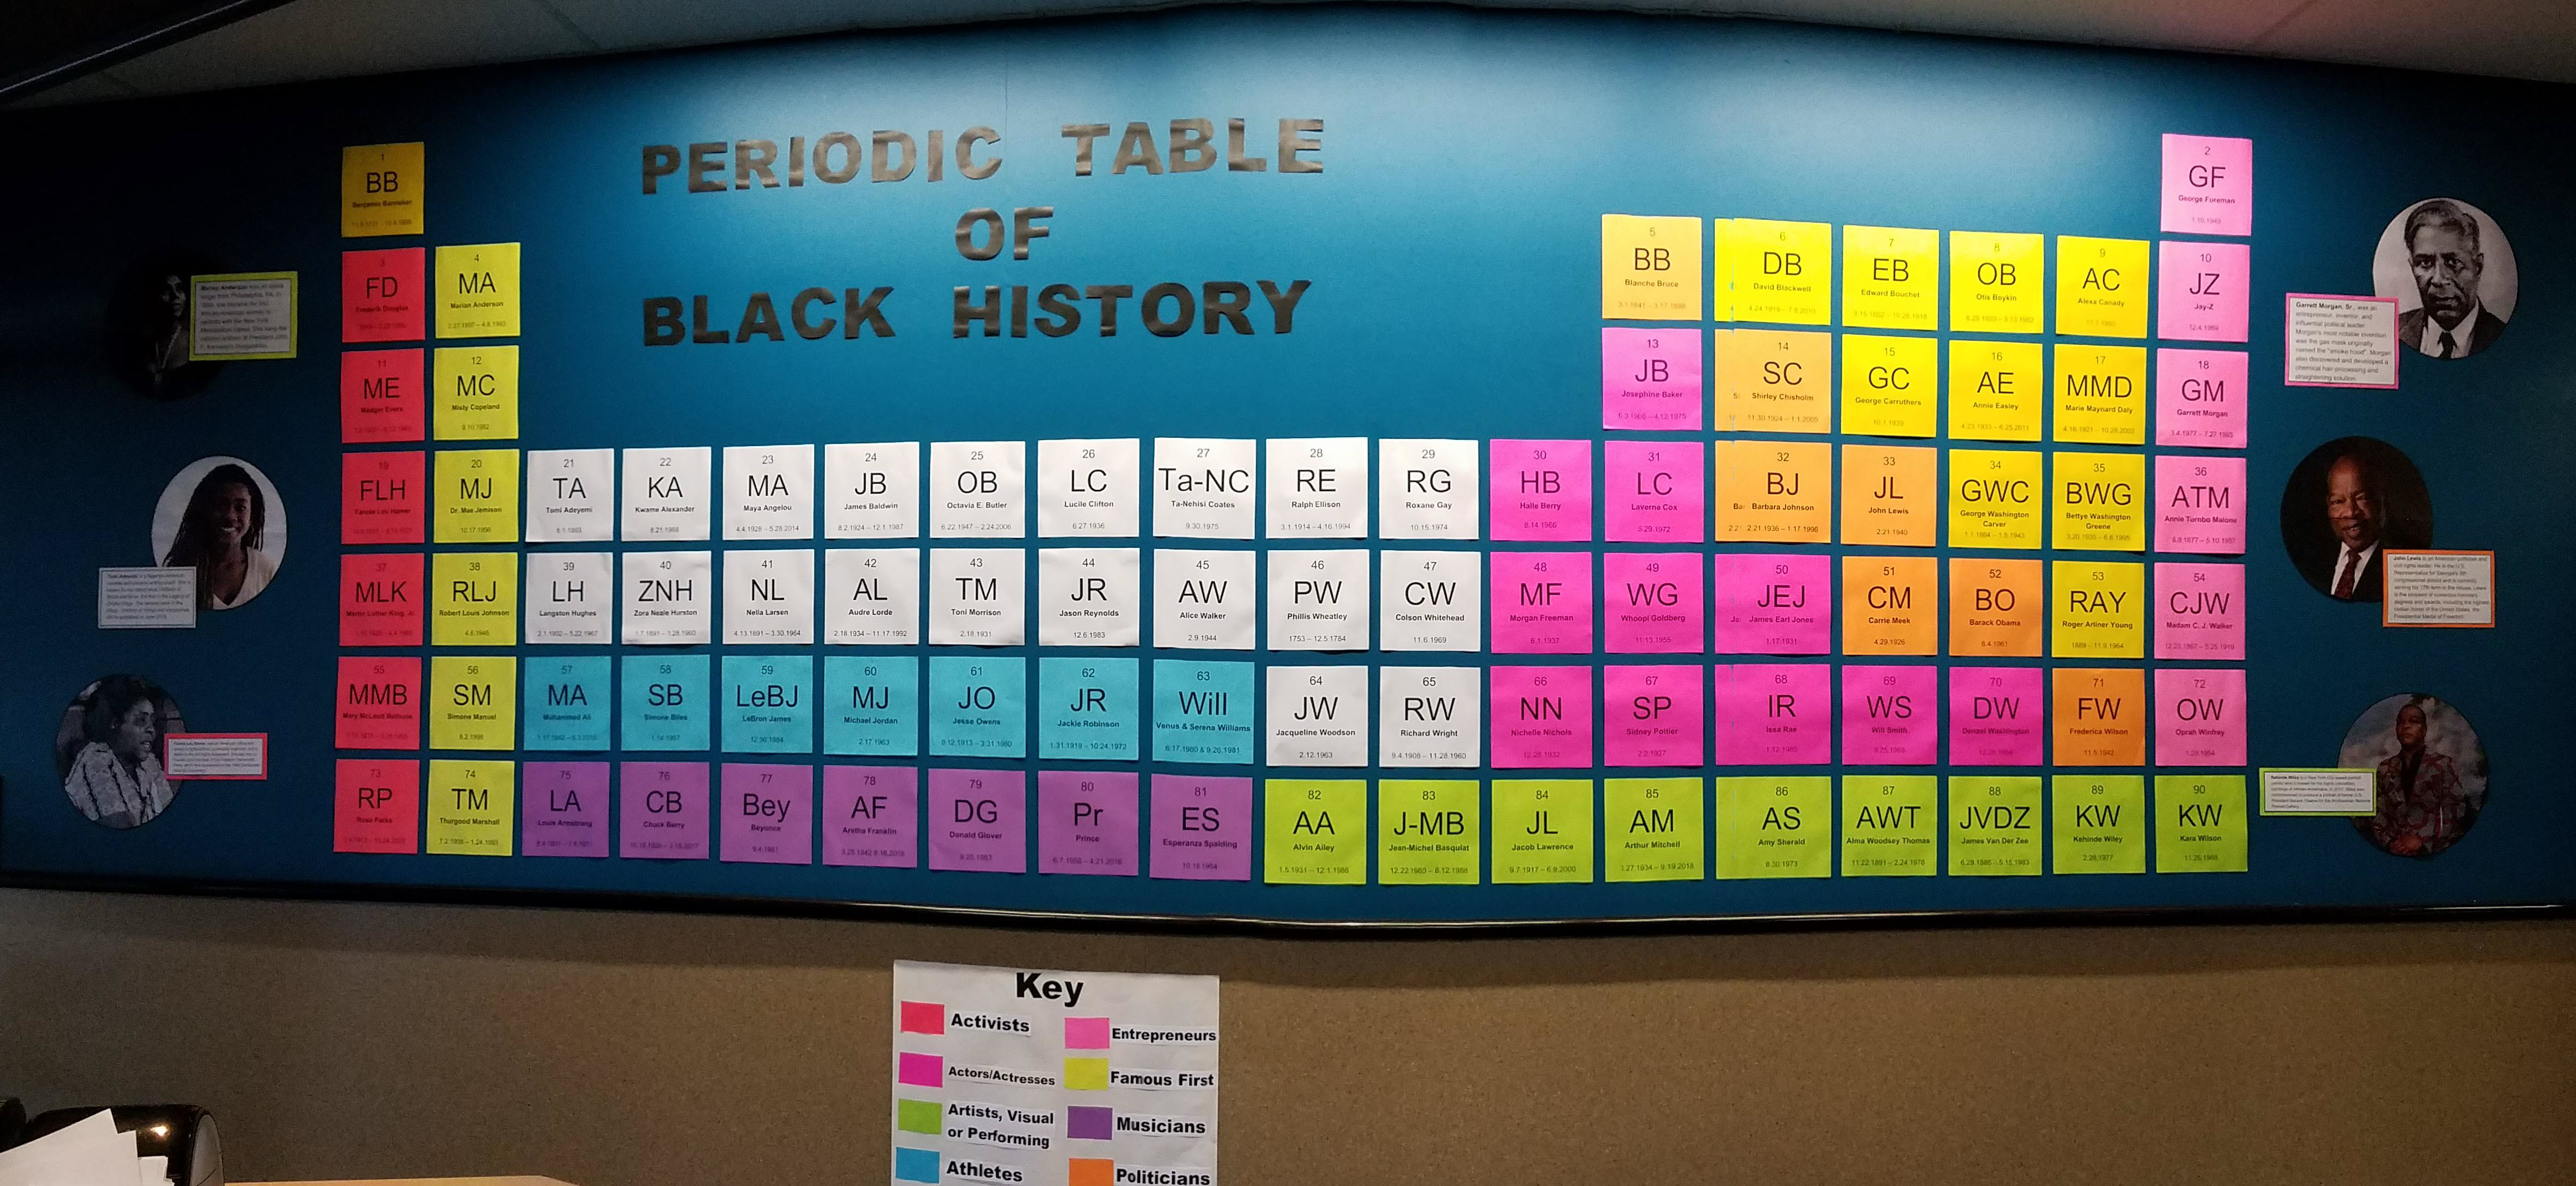 Periodic Table of Black History